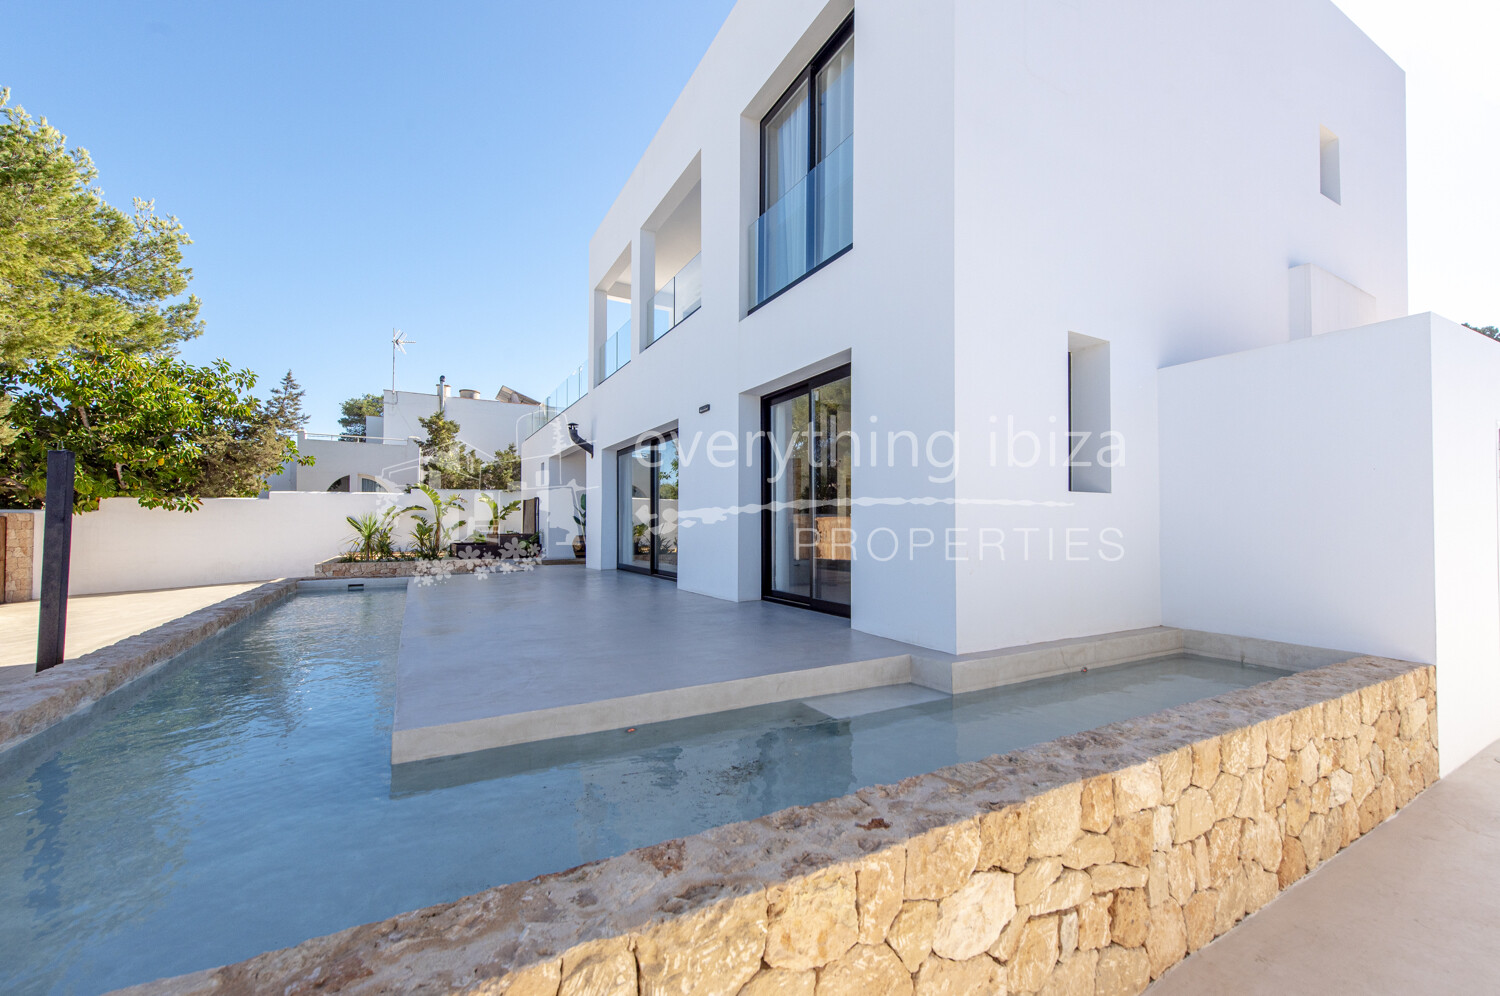 Stylish Contemporary Villa in Peaceful Setting near Beach with Sea and Sunset Views, ref. 1692, for sale in Ibiza by everything ibiza Properties